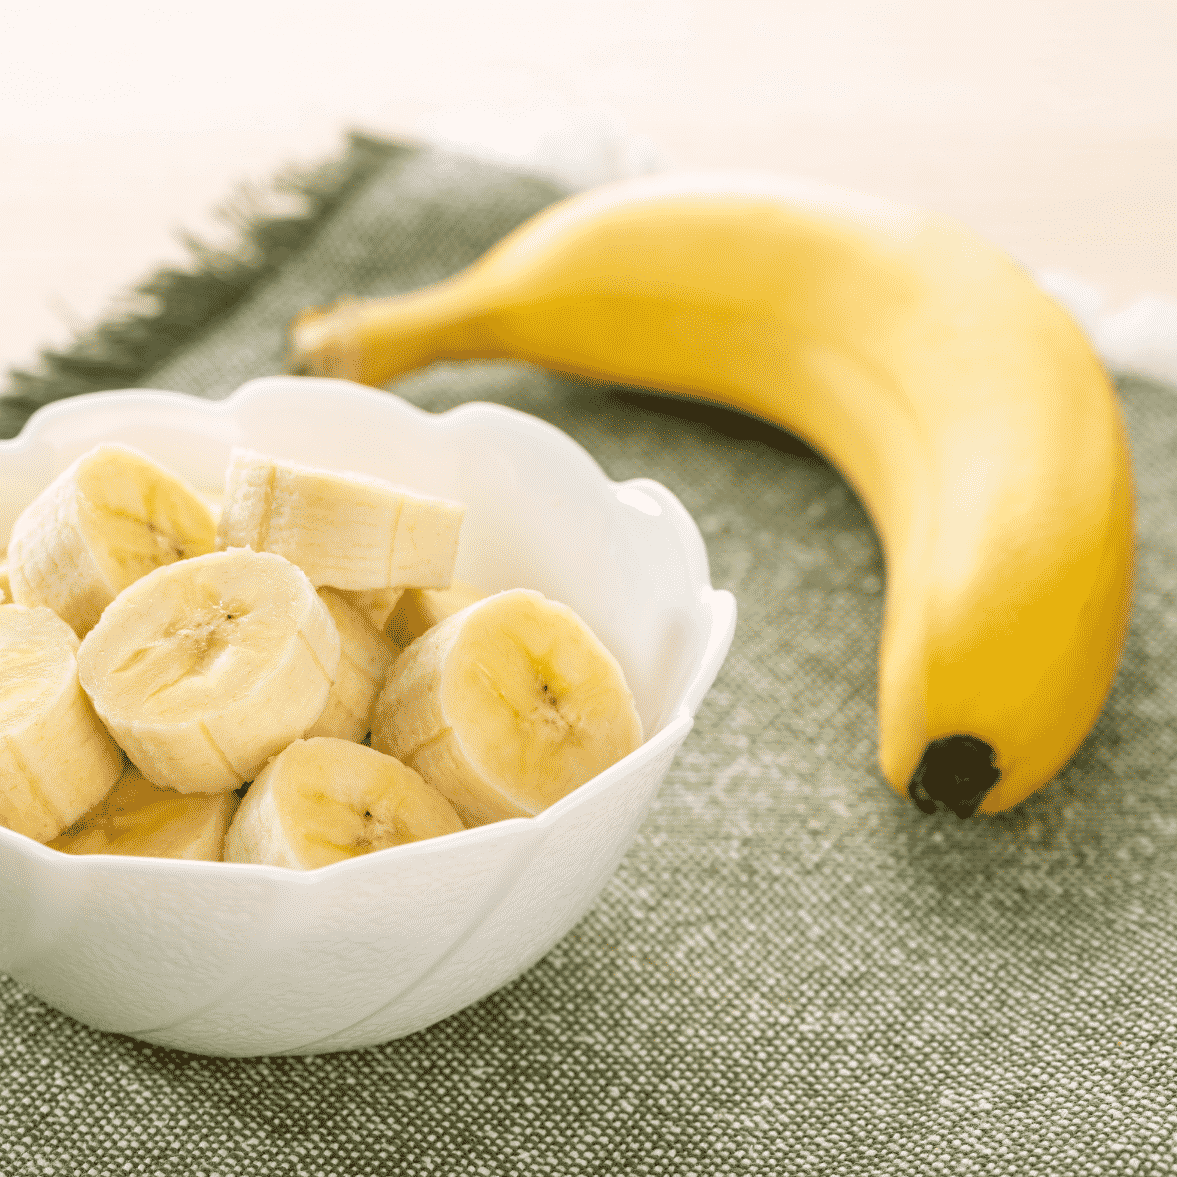 Do Bananas Make You Gain Weight Or Help With Weight Loss